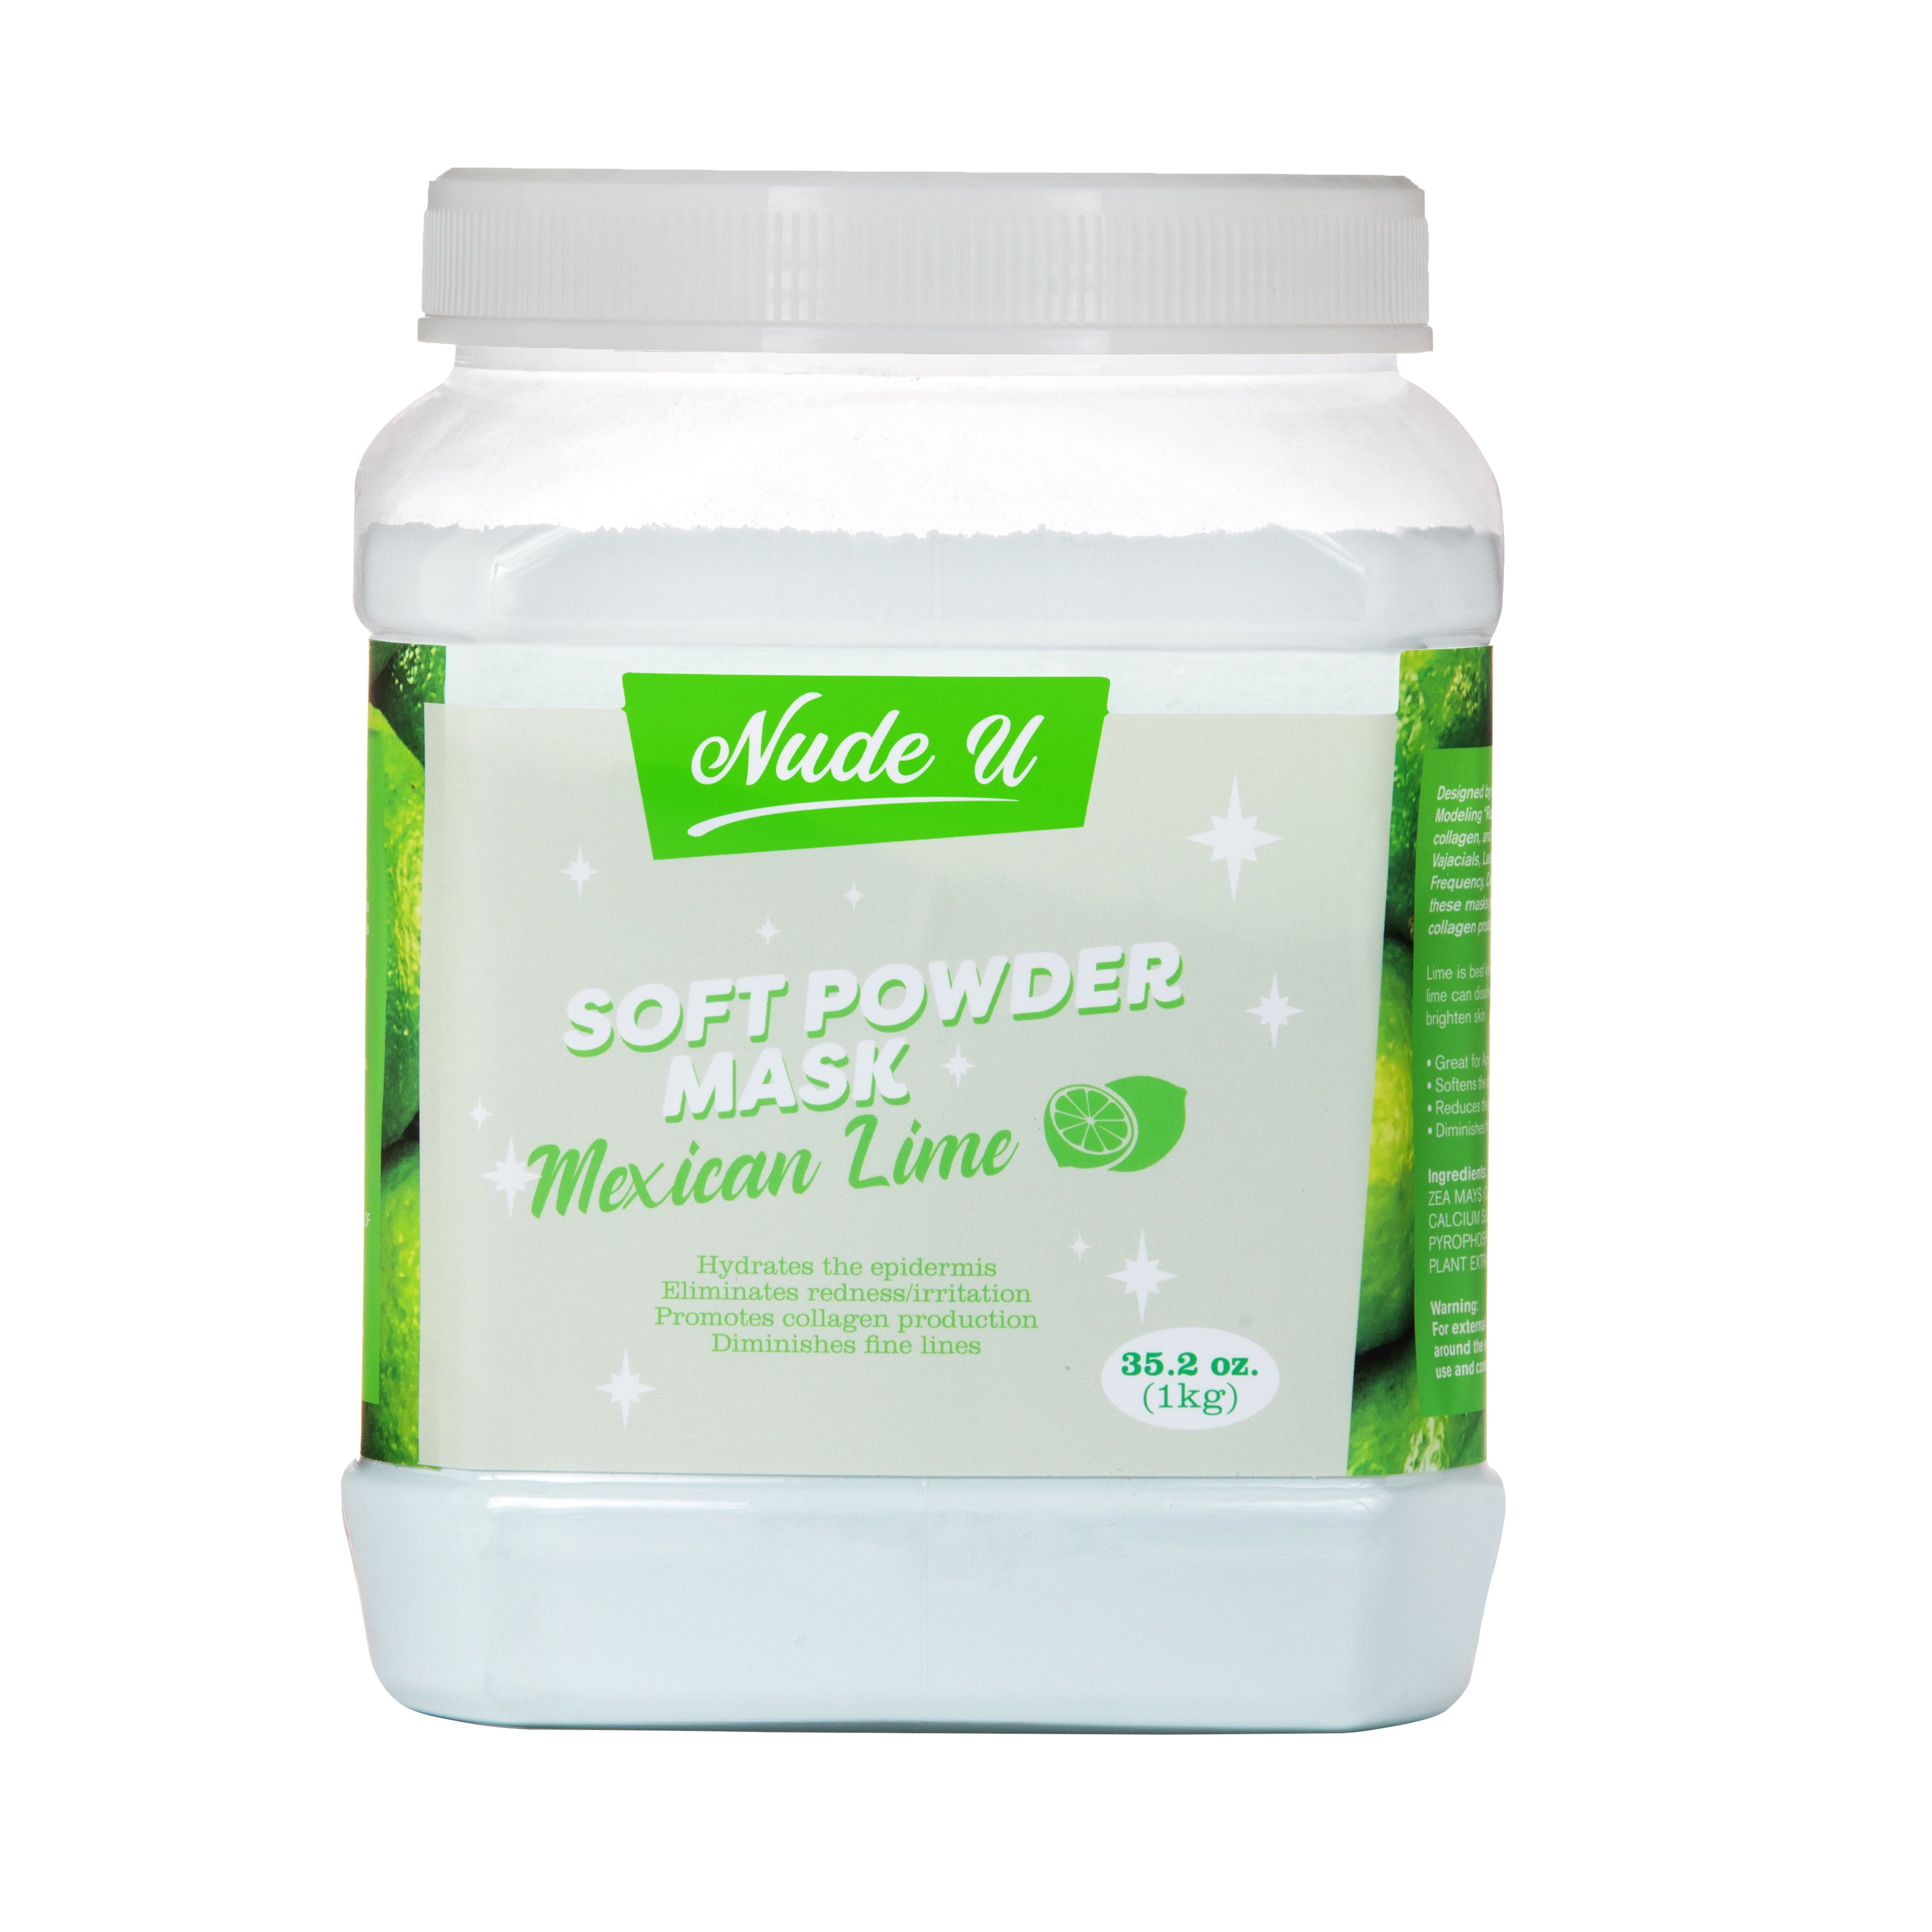 Mexican lime soft powder mask